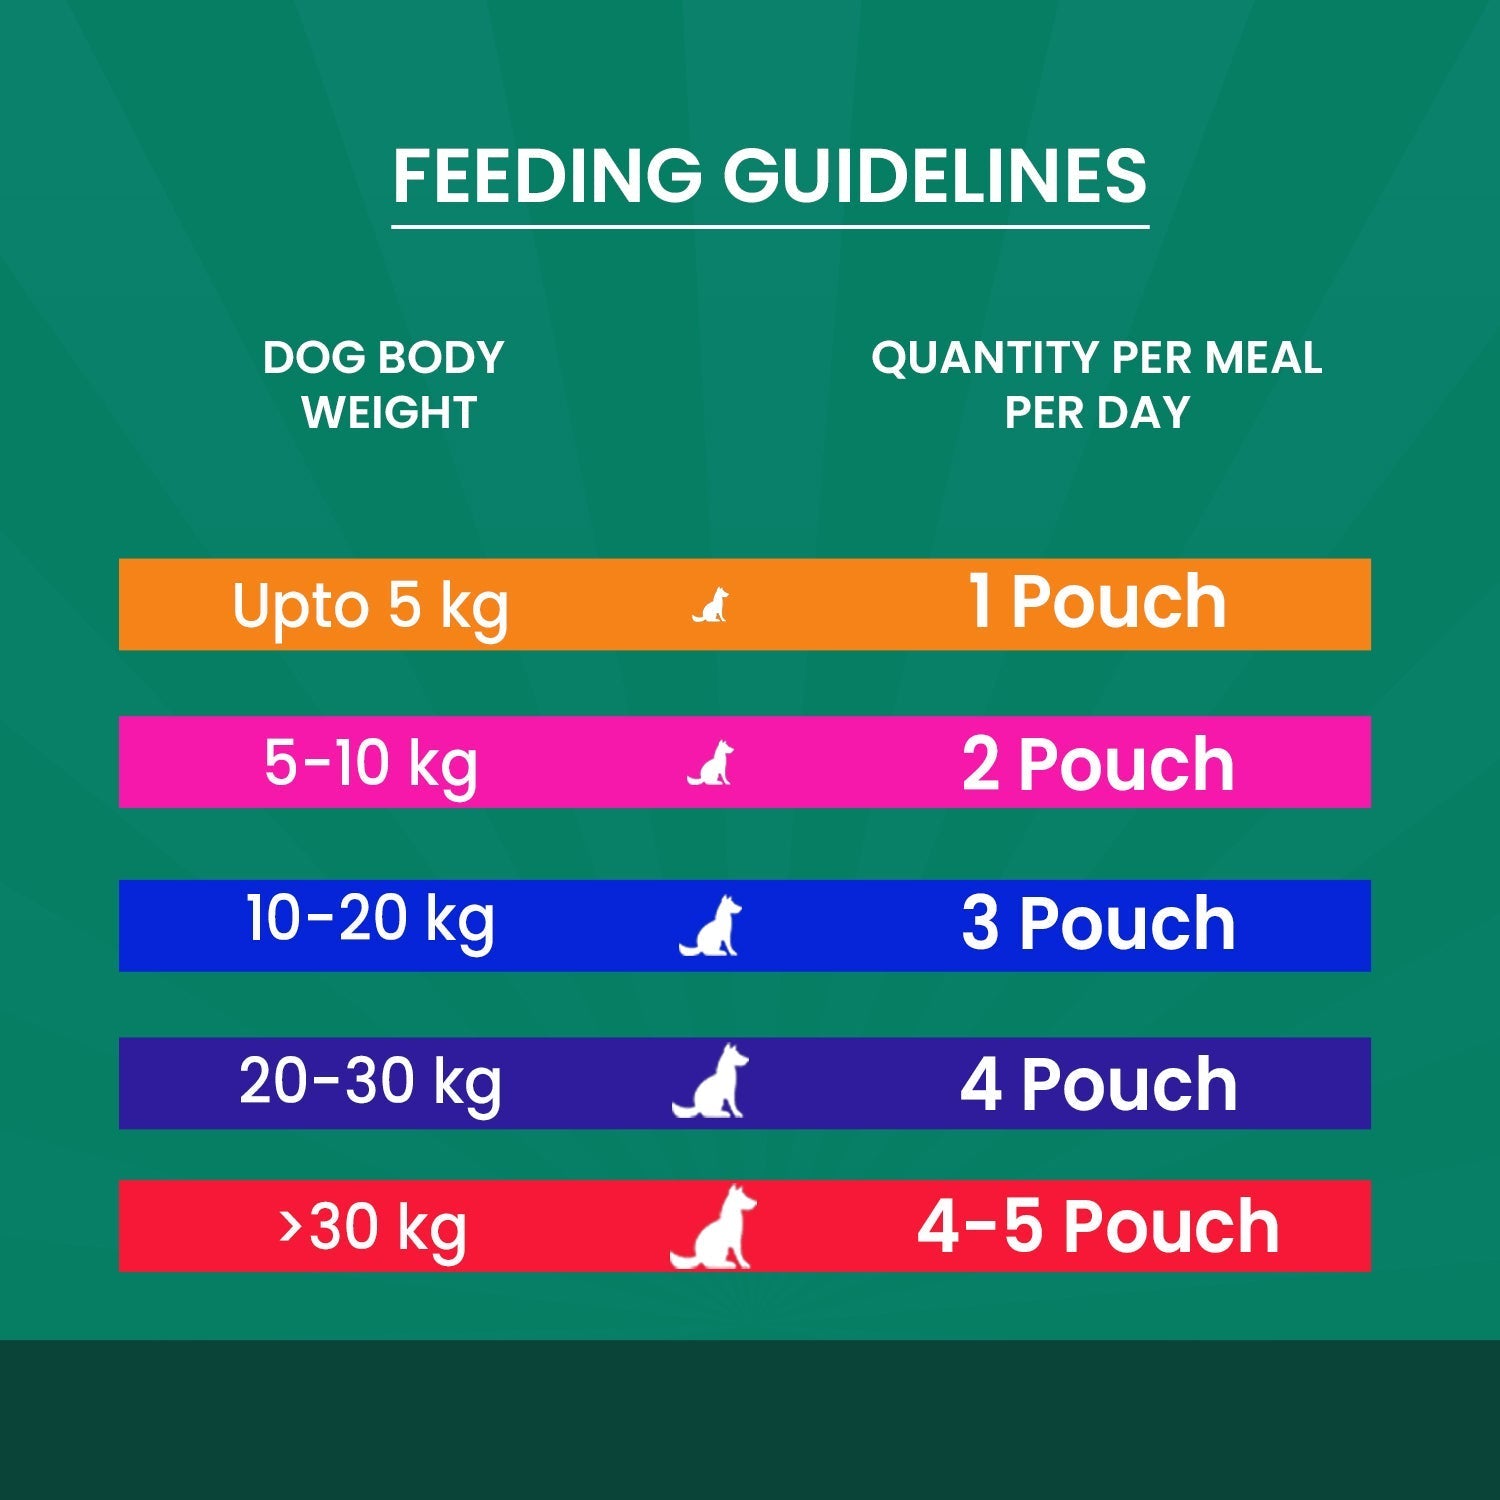 Feeding Guidelines for dogs